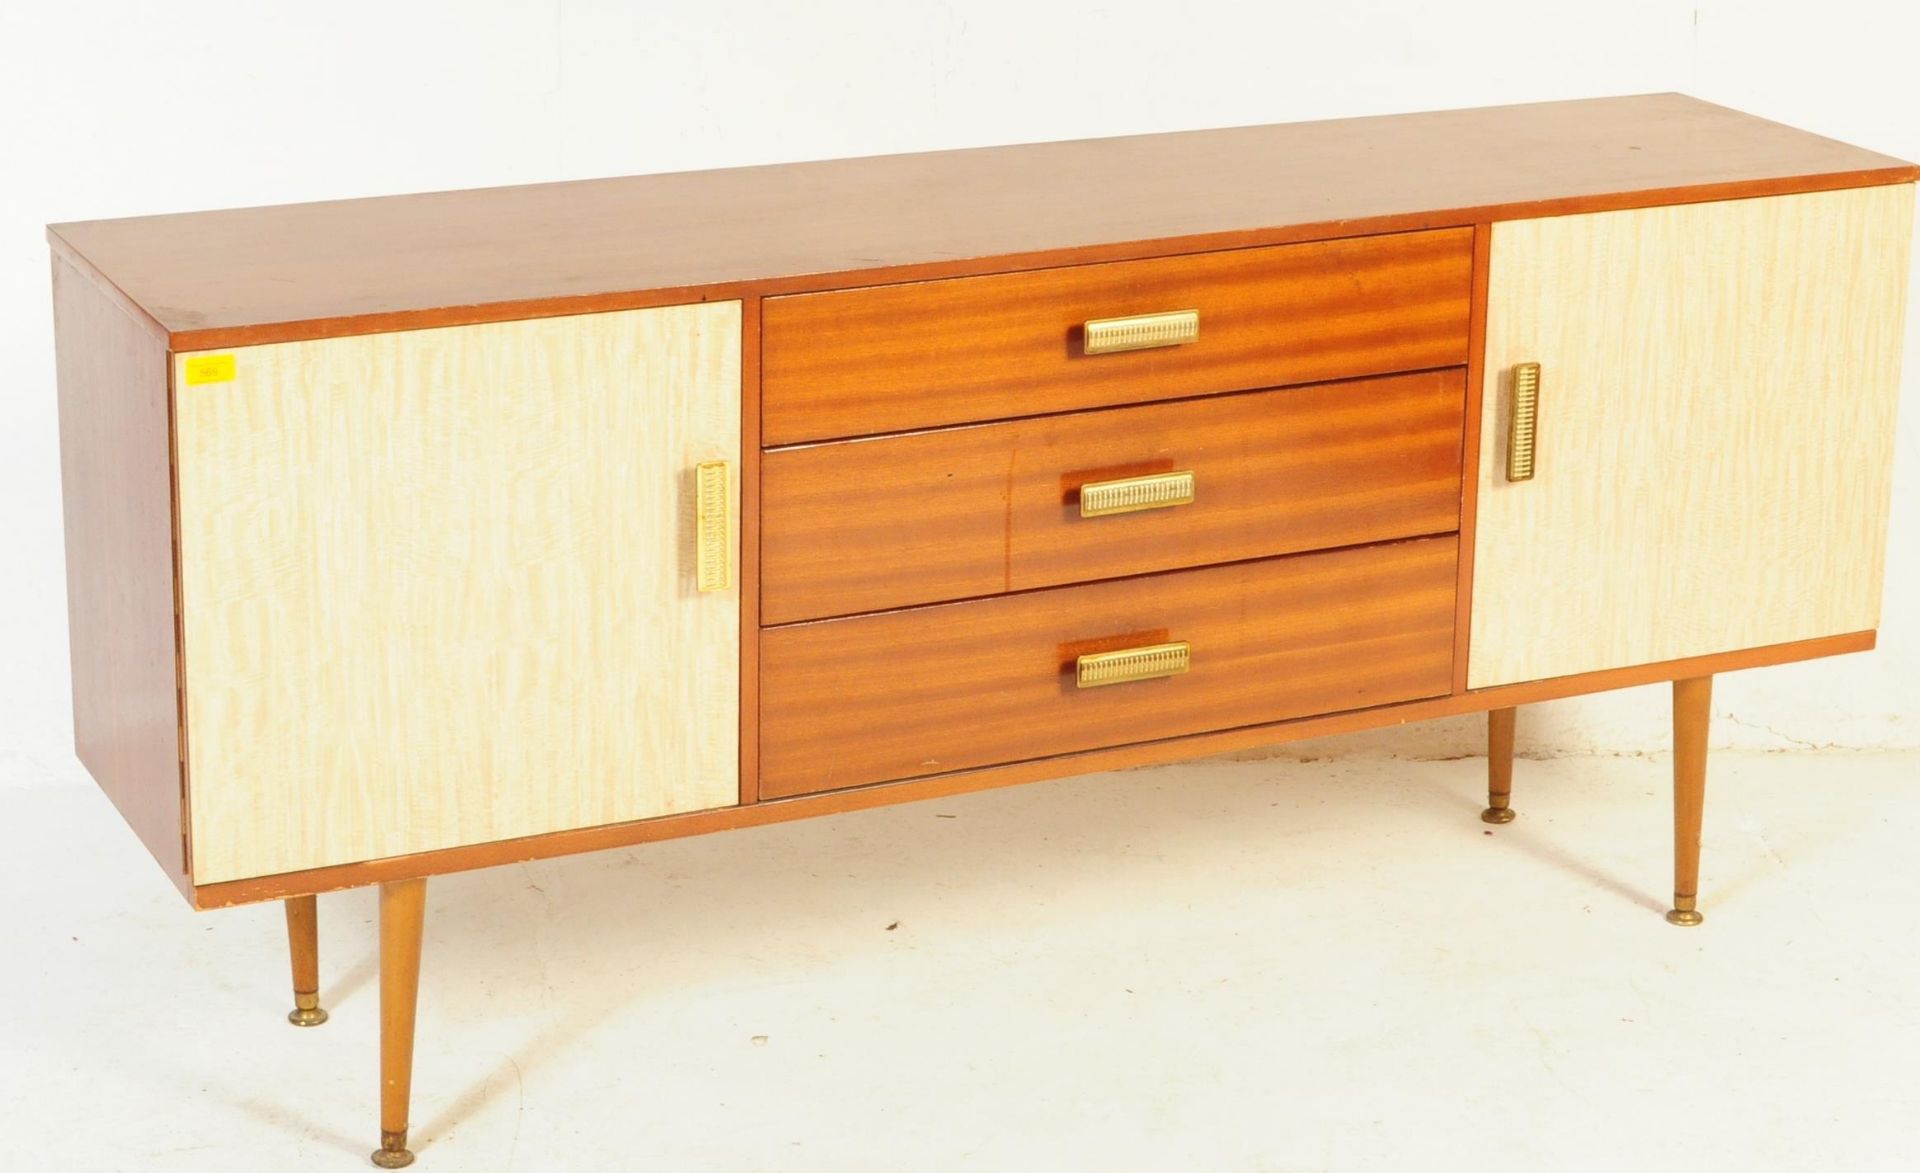 A RETRO VINTAGE 1970 WOODEN SIDEBOARD WITH FORMICA COVERED DOORS - Image 2 of 5